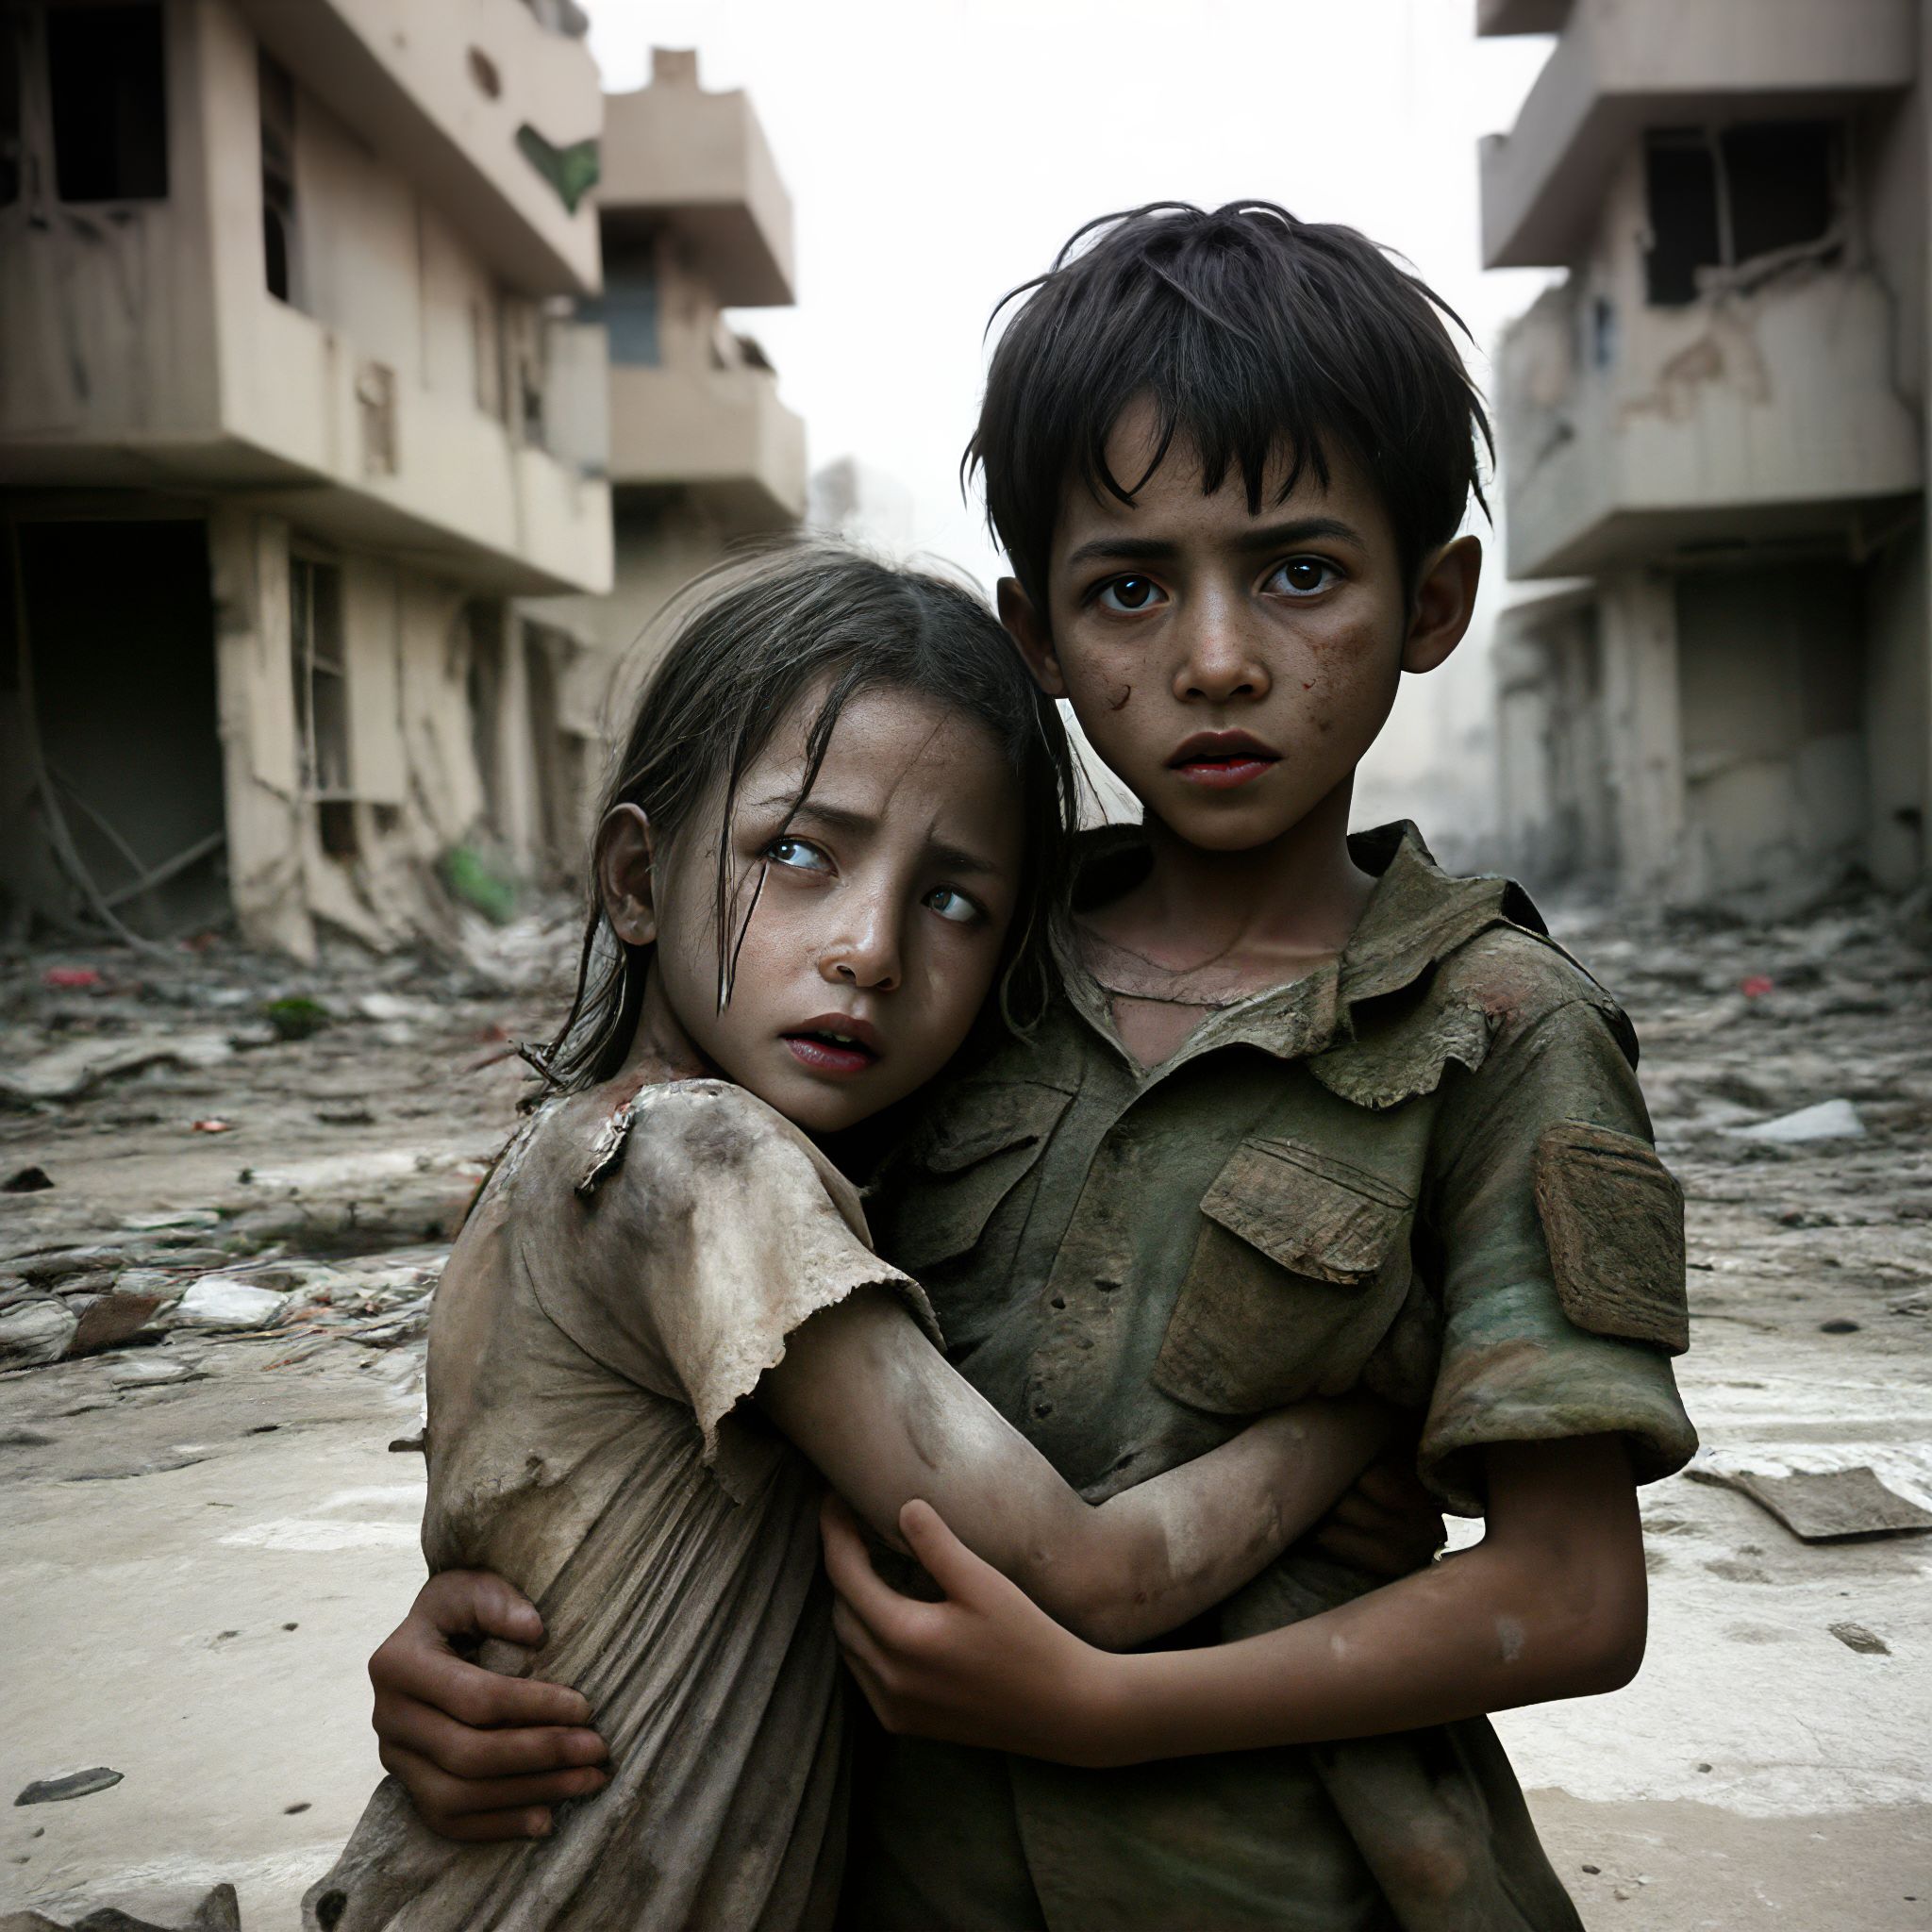 2 children, a girl and a boy in tattered, dirty clothes, with dirt on their faces and arms. The little girl is about 6 years old, and she is holding the boy very tightly around the waist, with a look of fear upon her face. The boy, about 8 years old, consoles the girl with an arm around her waist and his hand on her arm. He has a look of numbness on his face. They are standing in the ruins of a war-torn city, with debris and dust all around. 